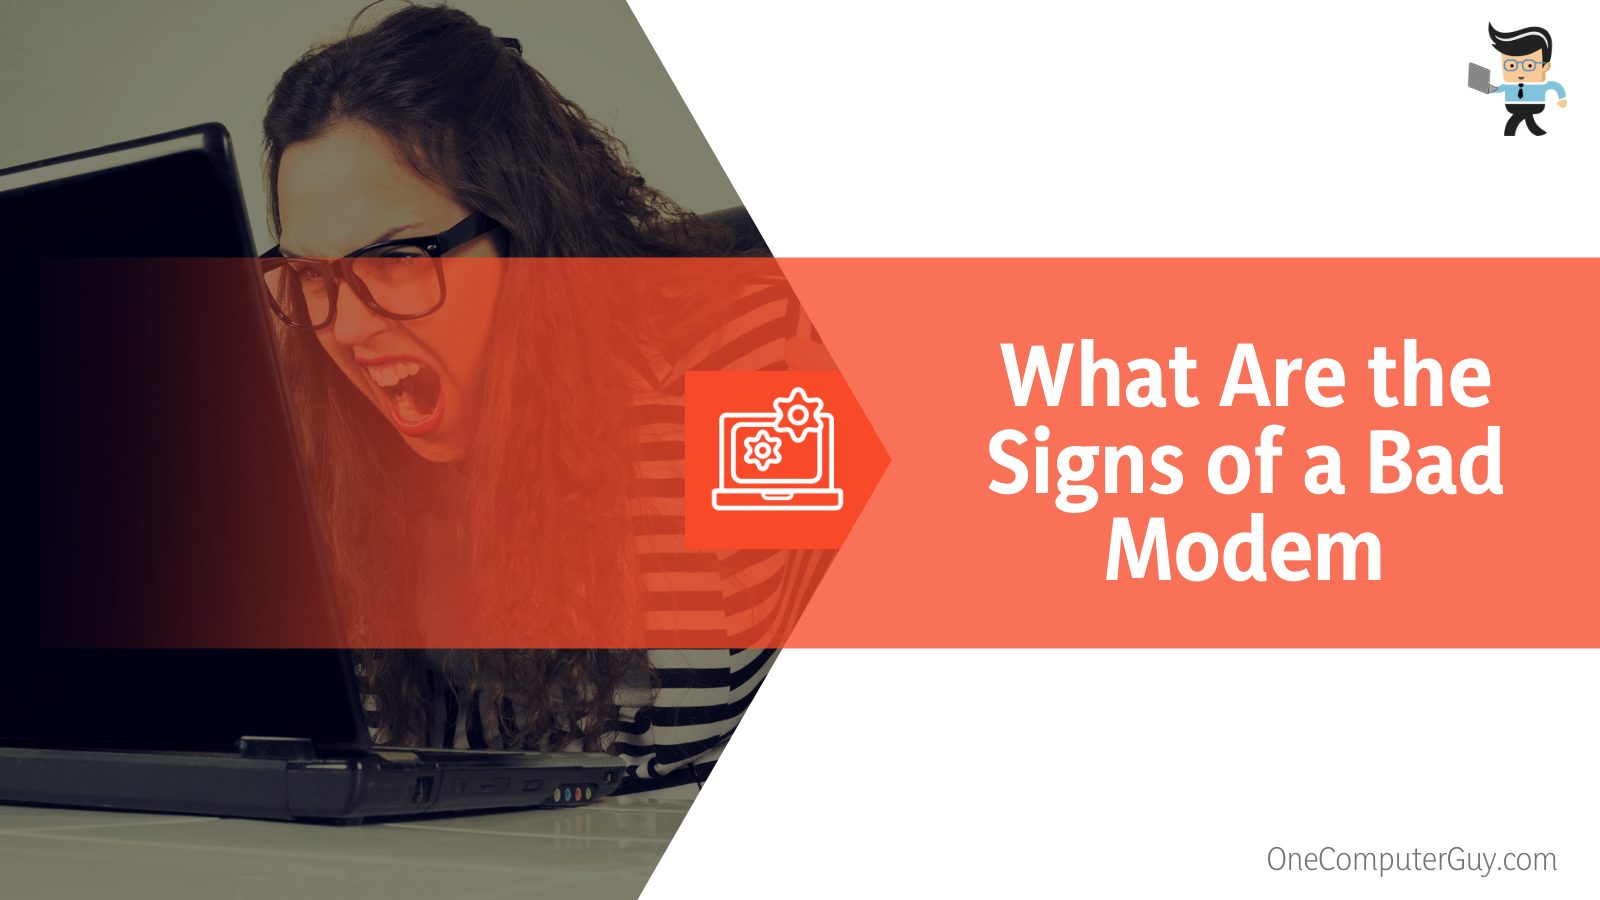 What Are the Signs of a Bad Modem